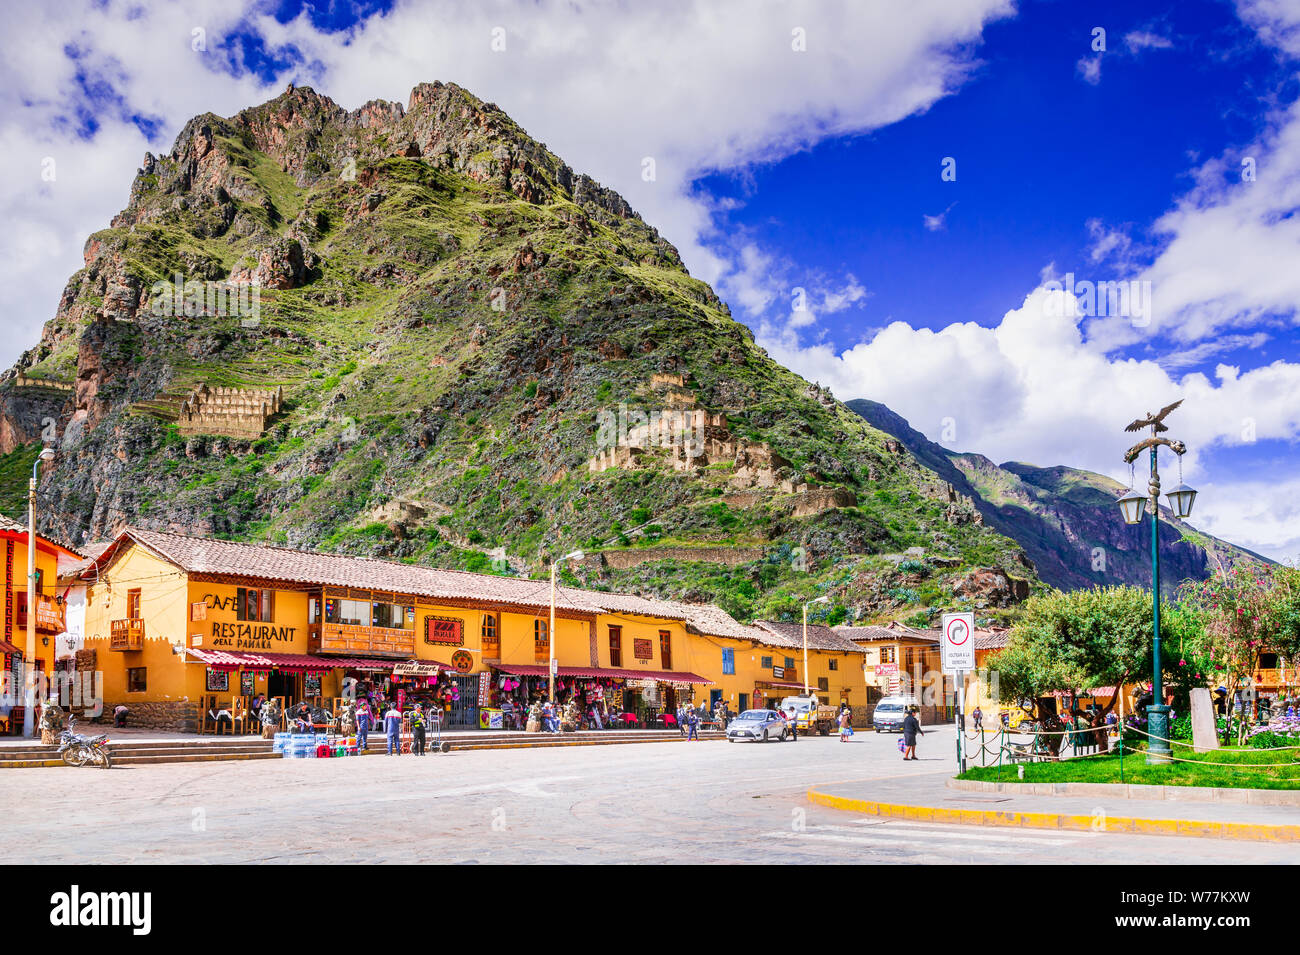 Ollantaytambo, Peru - April 2017: Downtown of the small ancient village Ollantaytambo, with Inca ruins on Andes Mountains. Stock Photo